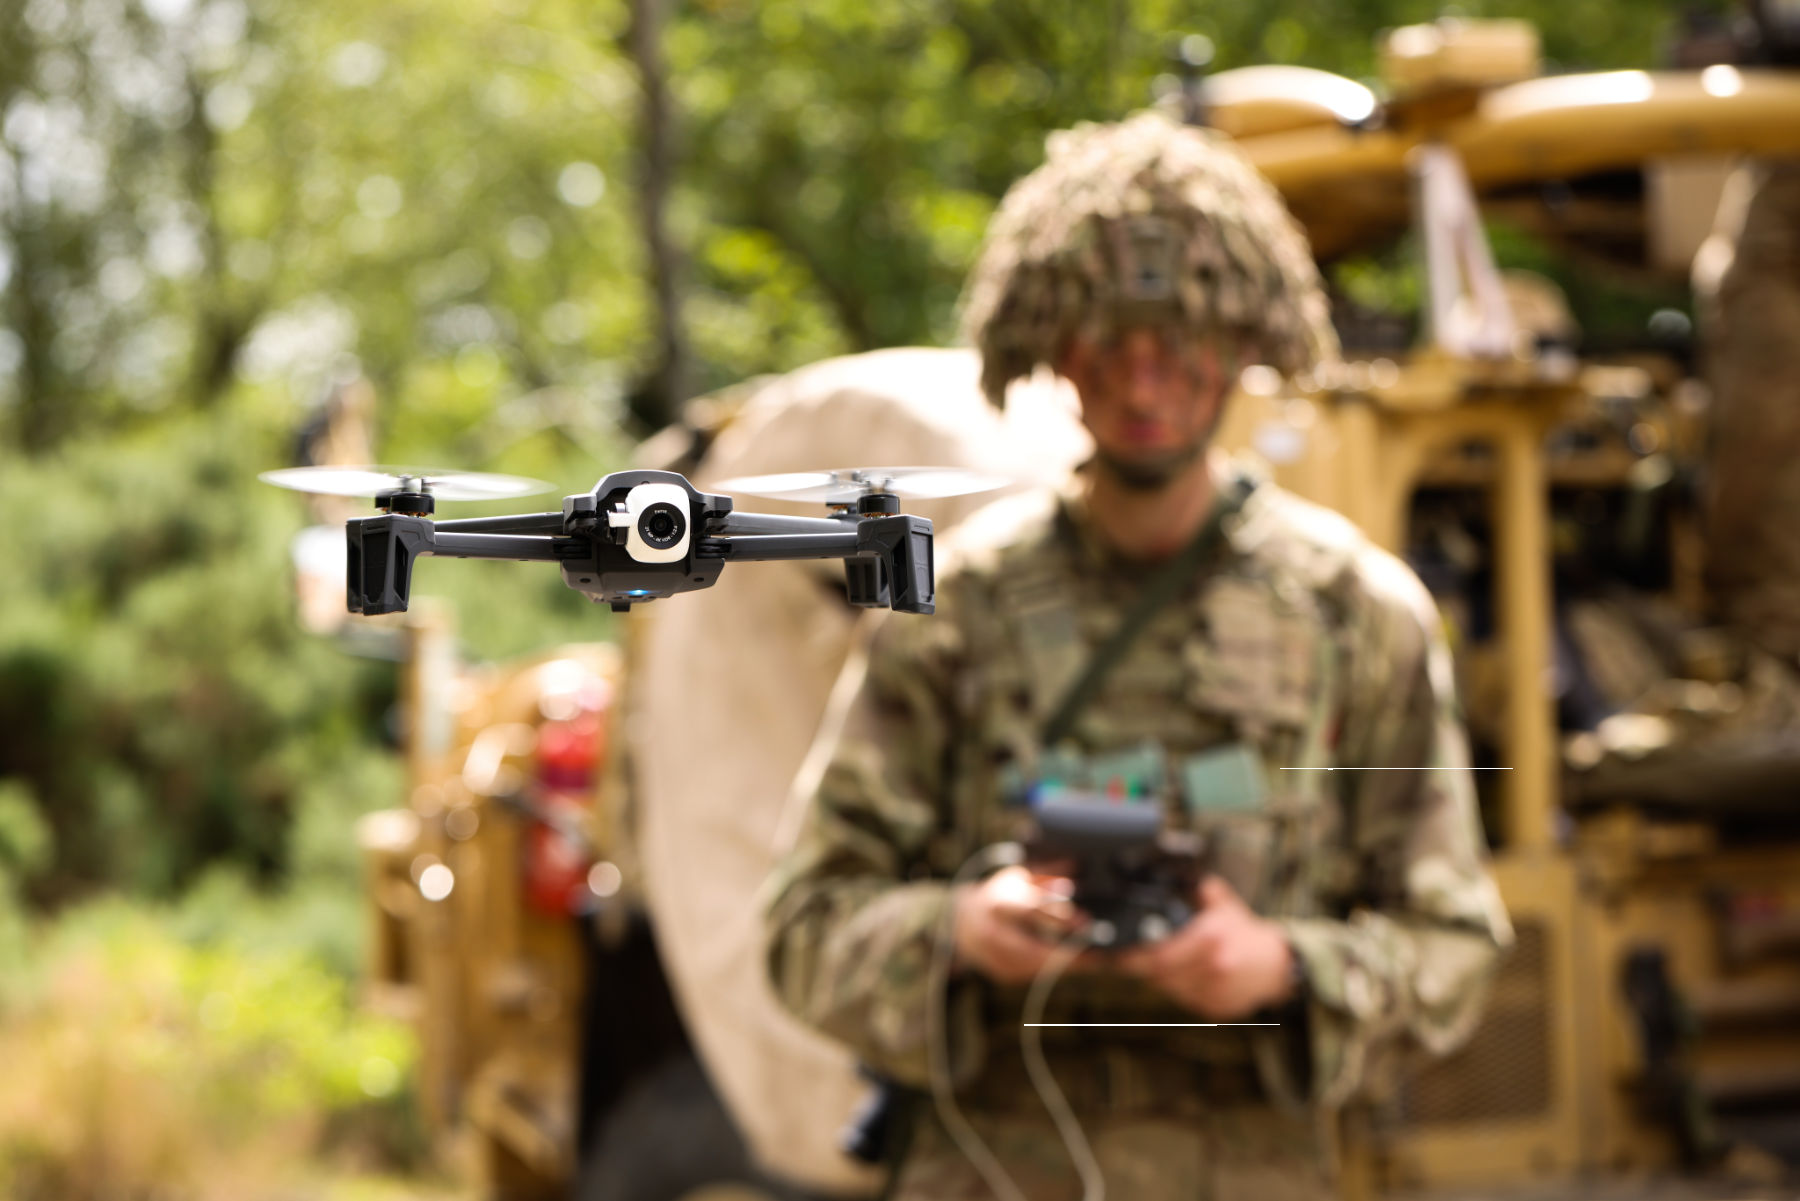 Trooper Woodcock, C Squadron, Royal Lancers, pilots a drone during Exercise LUCKNOW LANCER, Scotland. Exercise LUCKNOW LANCER, taking place across July 2022, sees the Royal Lancers maintain their reconnaissance skills while preparing for Operation CABRIT (Poland) in the Galloway Forest, Scotland. The Lancers are joined by elements of the Household Cavalry Regiment, the Royal Artillery, the Royal Danish Army, and the US Air Force. In total, around 750 personnel are to be involved with the exercise, making it one of the largest in the UK this training year.